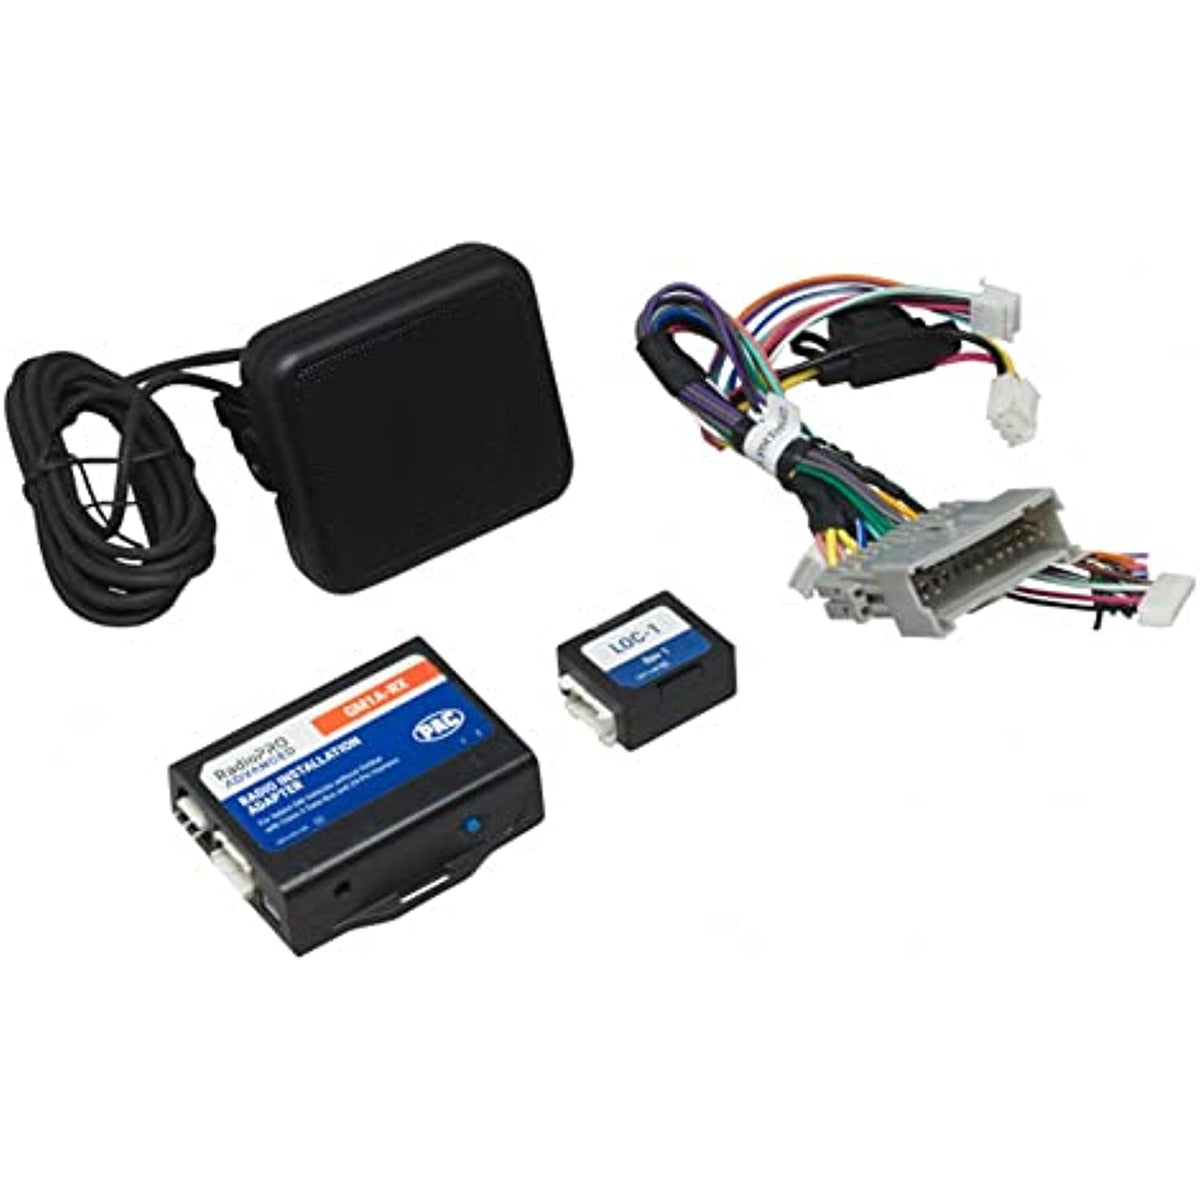 PAC GM1A-RX RadioPRO Advanced Interface for General Motors Vehicles